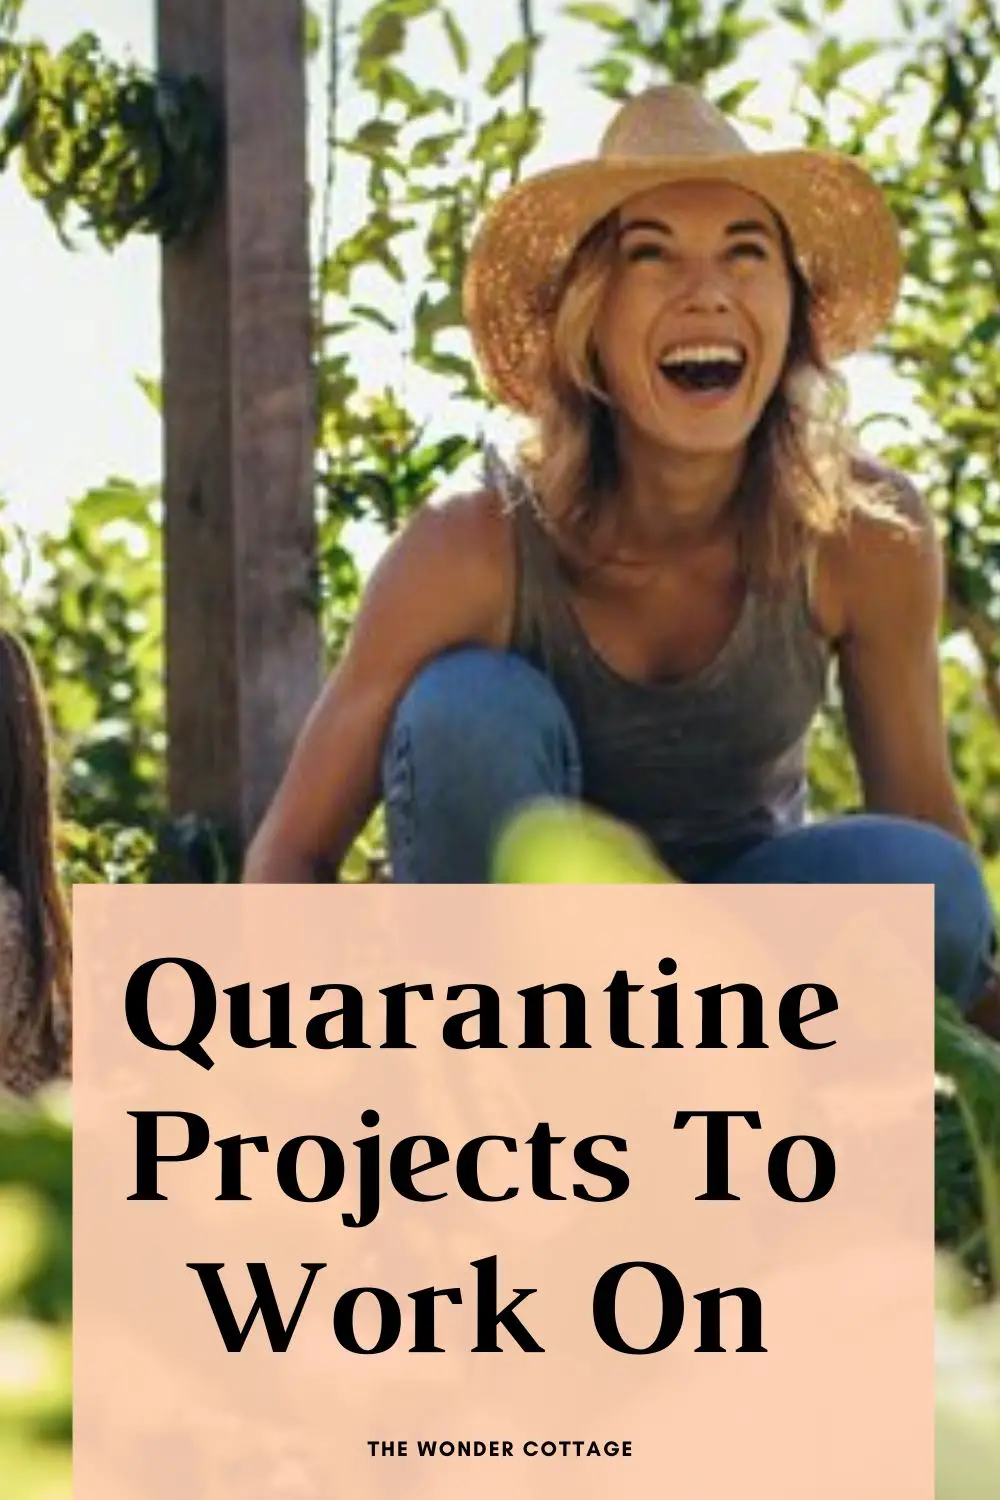 Quarantine projects to work on